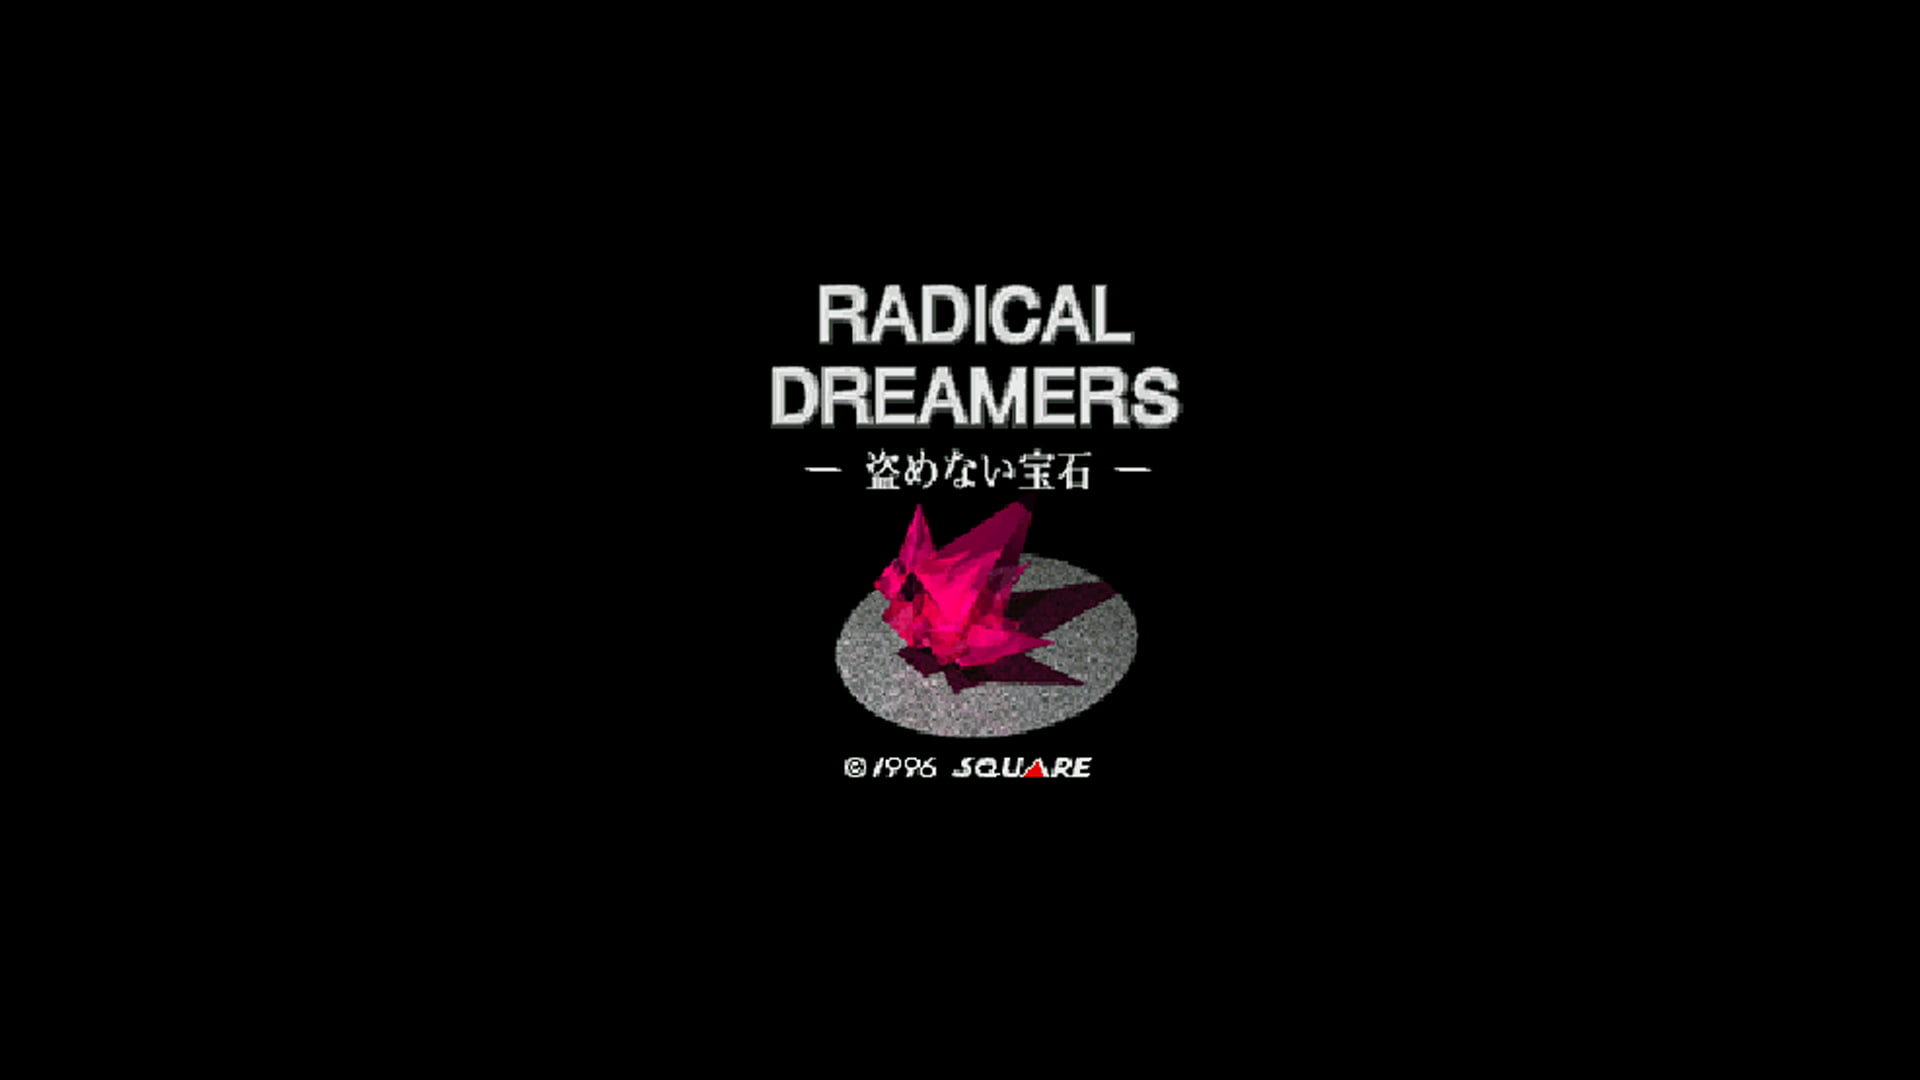 radical dreamers, video games, typography, black background